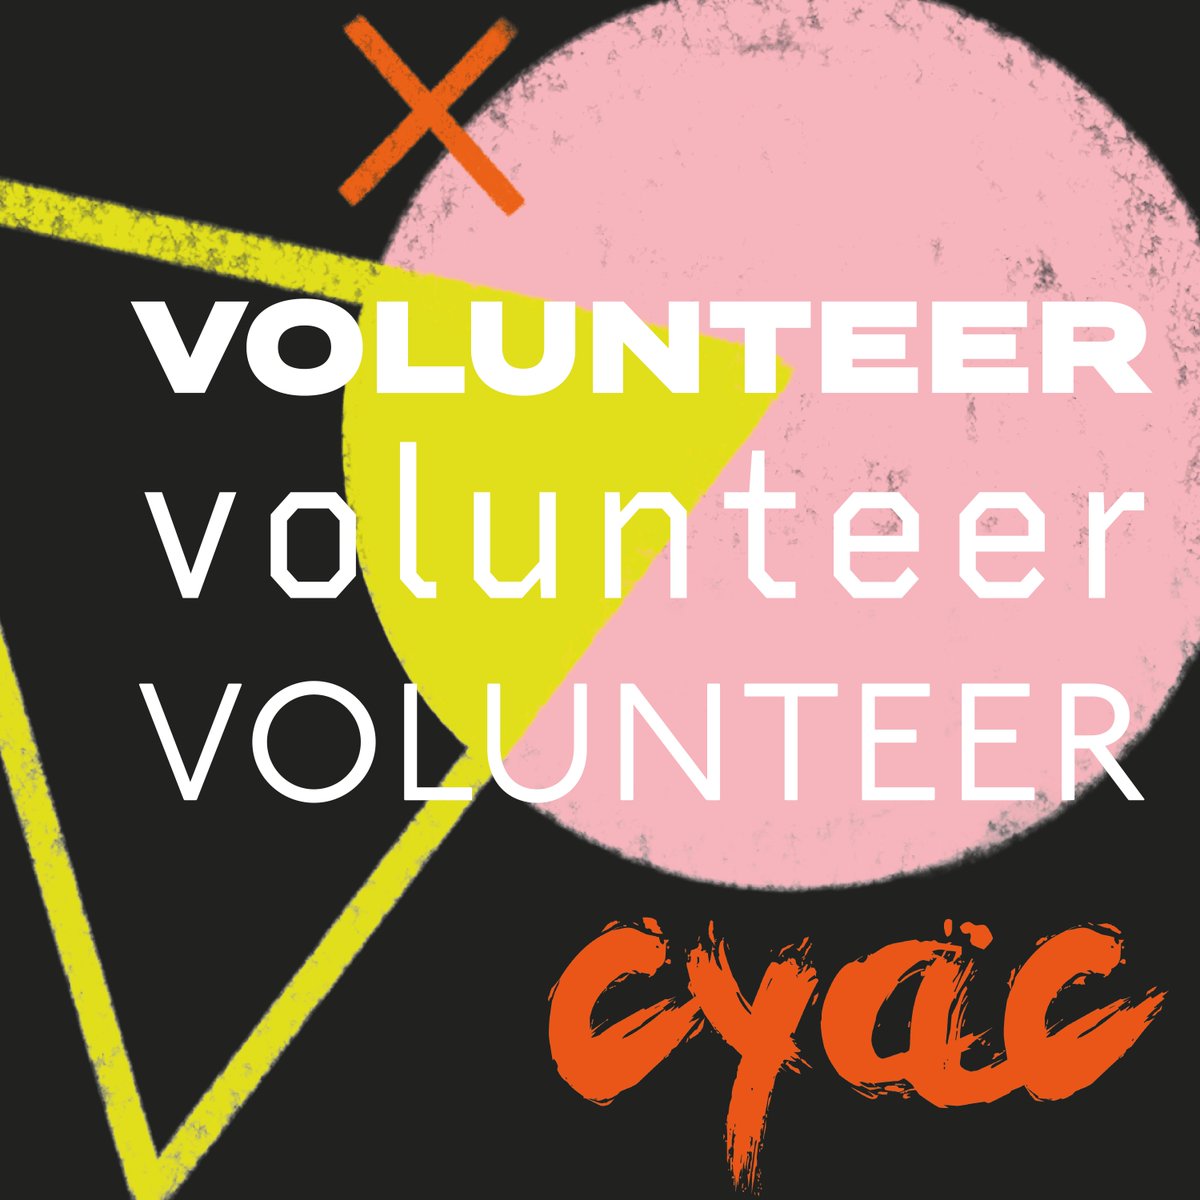 If you're aged 14-19 join the CYAC team and volunteer with us at our Youth Takeover of Fairfield Halls on Sat 2nd Nov! It will be a day of performances and workshops covering music, theatre, dance, visual arts and more, created by and for young people.